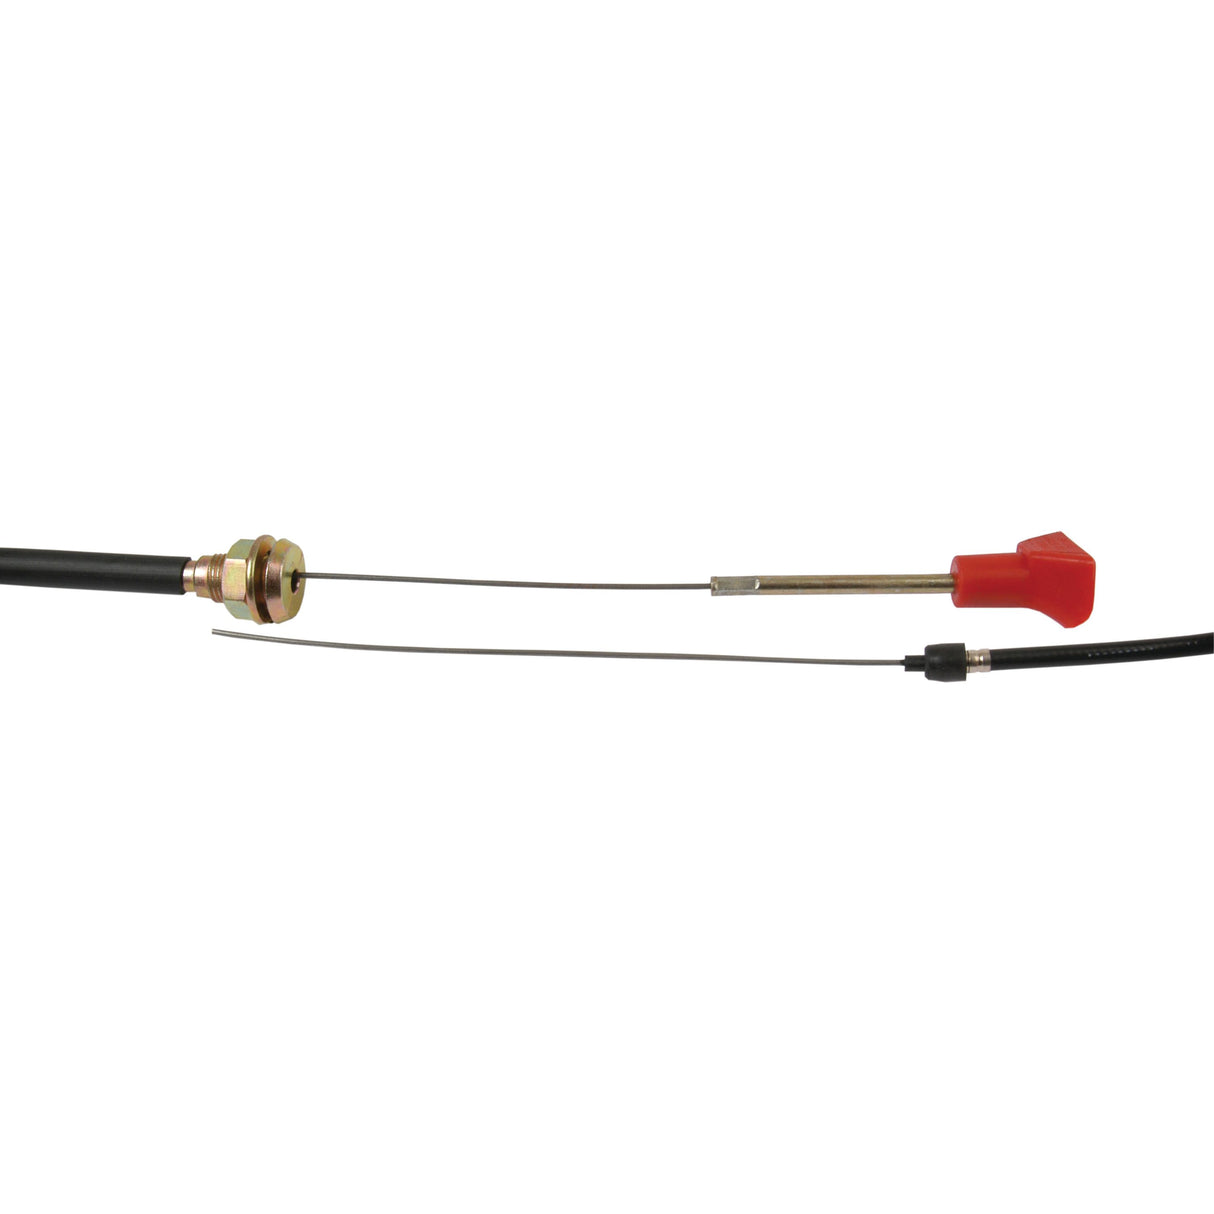 Engine Stop Cable - Length: 1775mm, Outer cable length: 1412mm.
 - S.65746 - Massey Tractor Parts